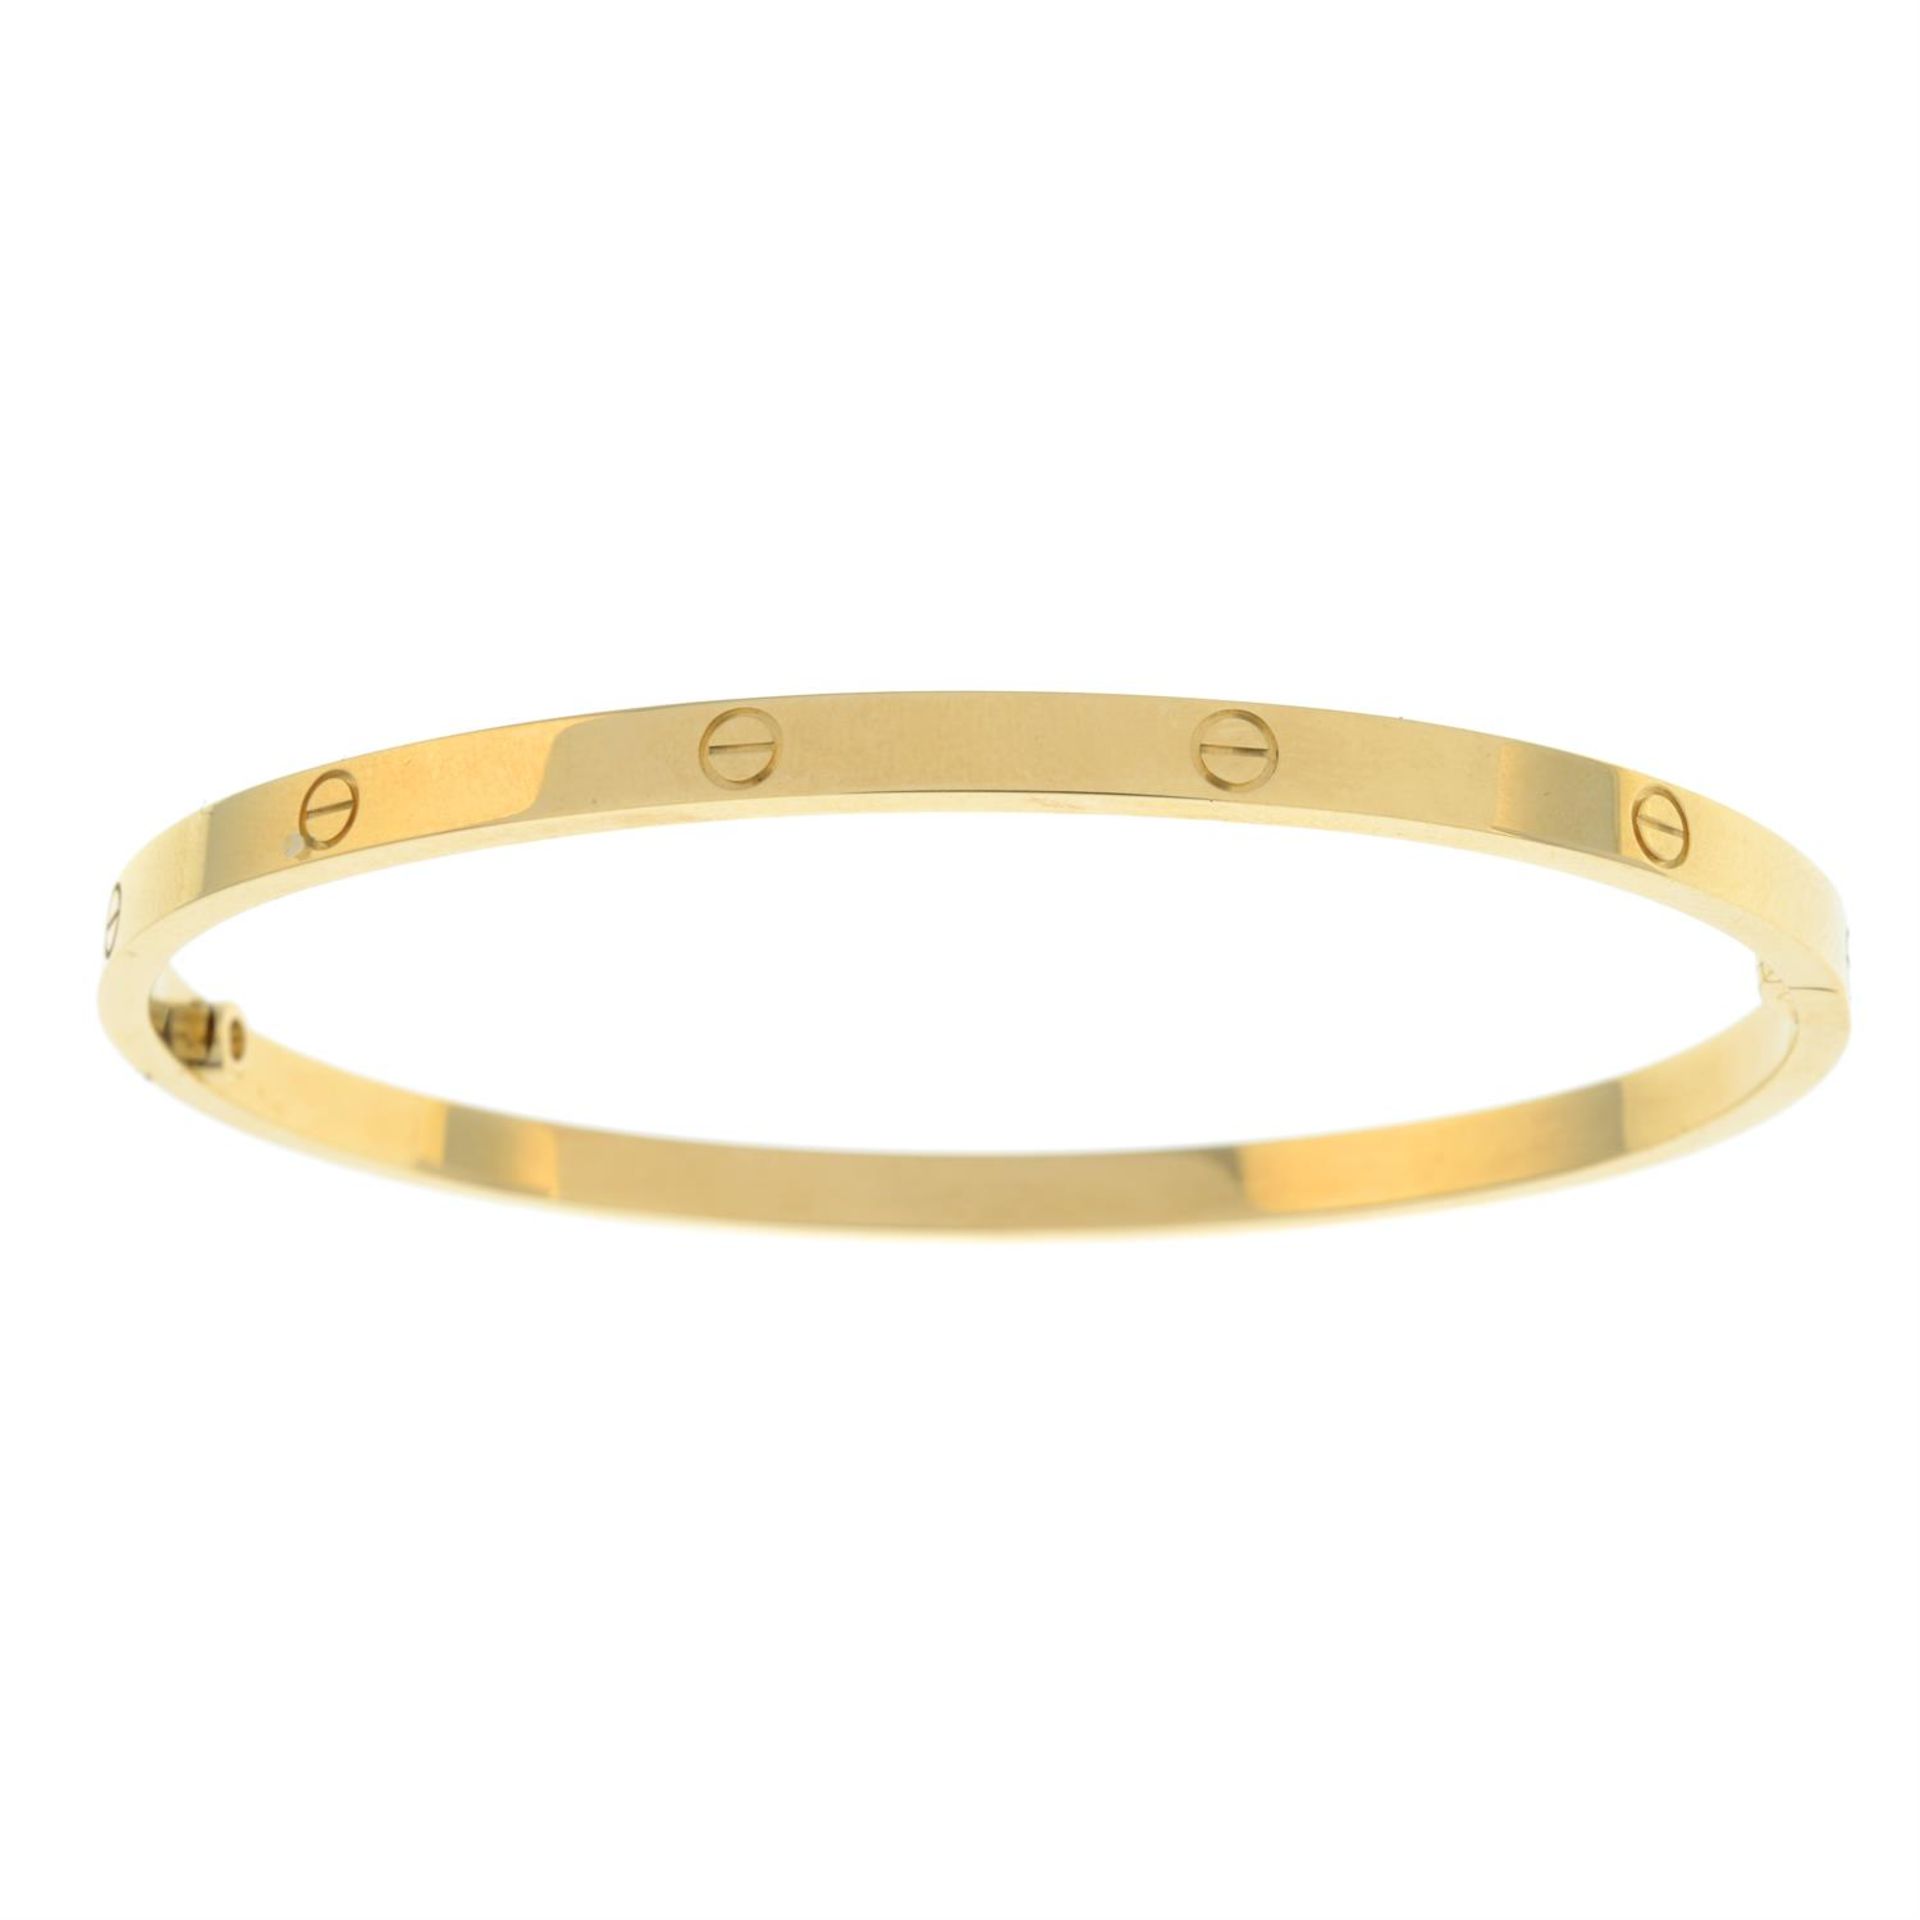 An 18ct gold 'Love' bangle, by Cartier. - Image 4 of 4